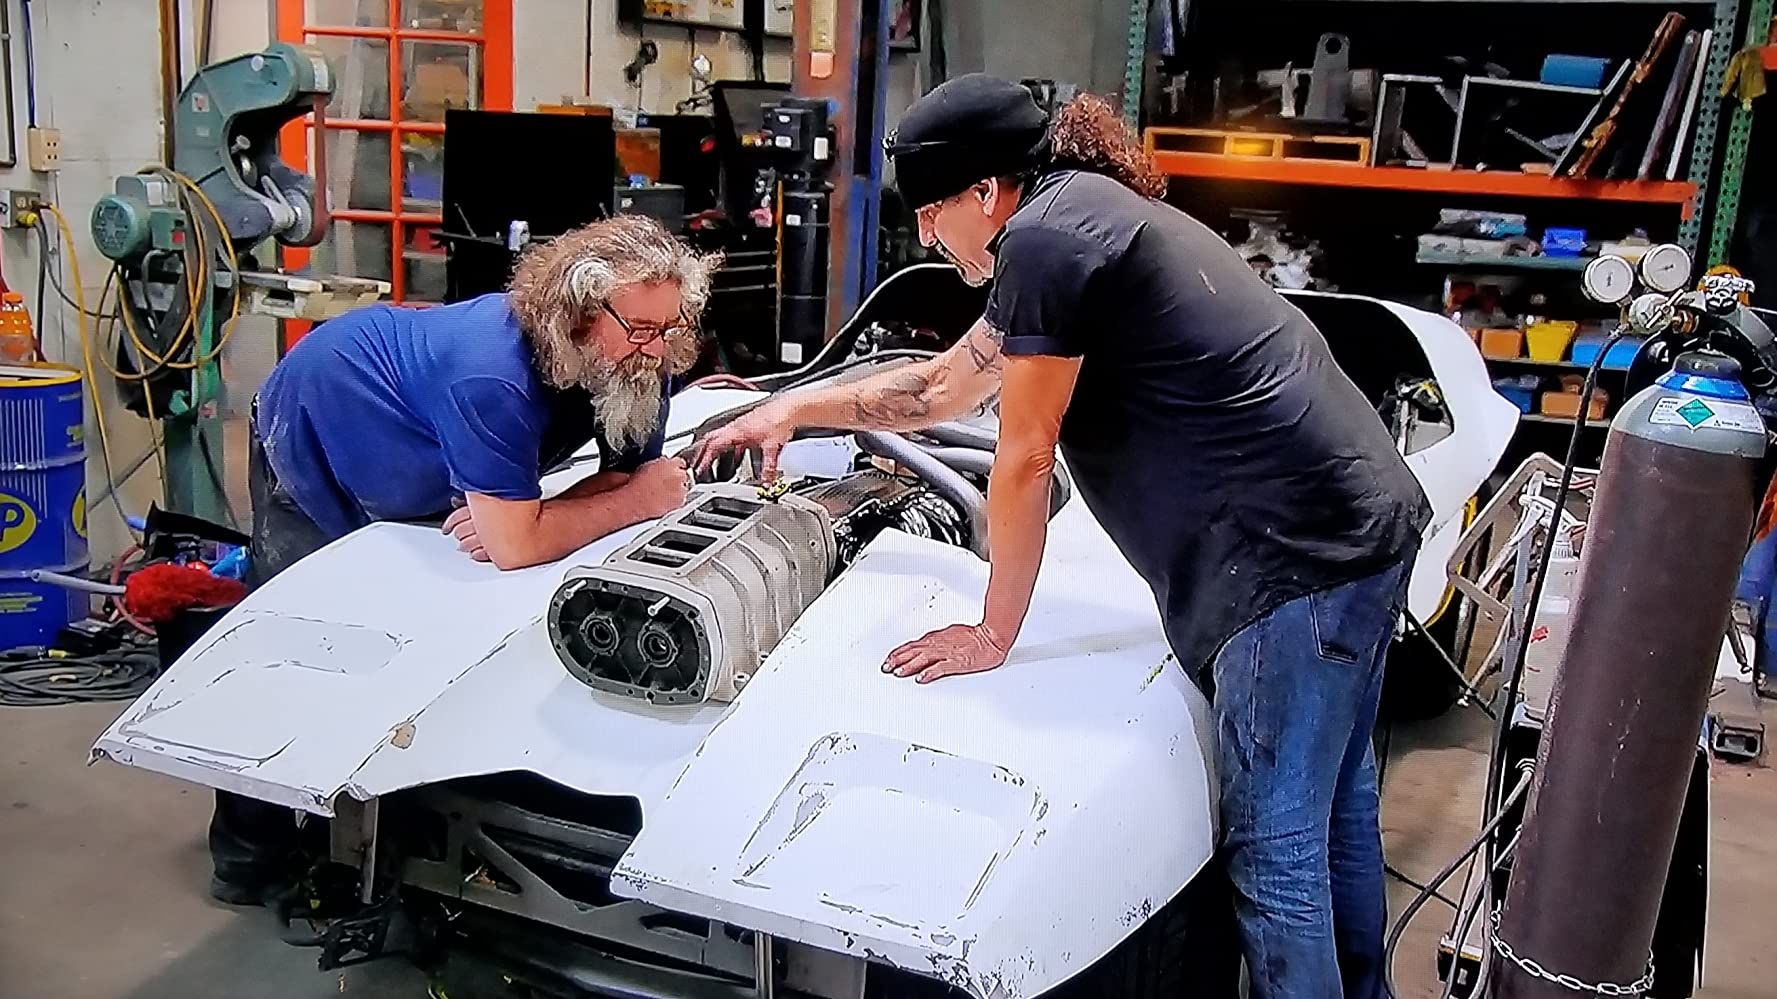 Mark and caveman working on a car